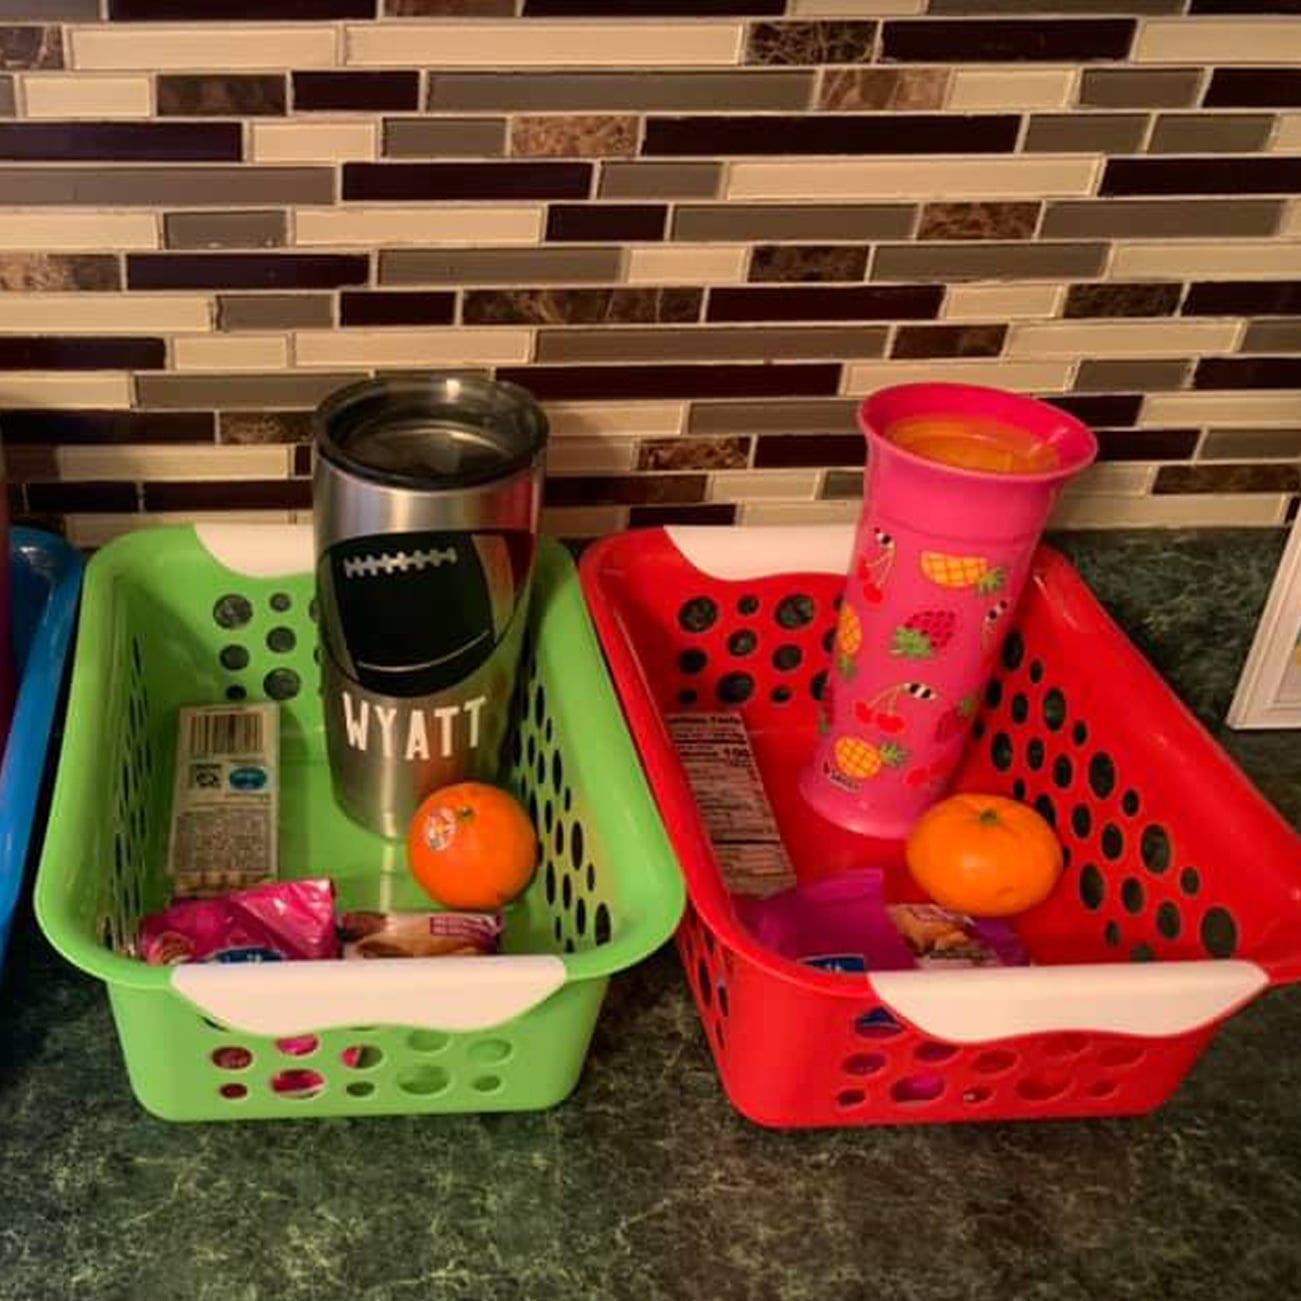 Food Bin Hack to Keep Kids From Constantly Asking For Snacks